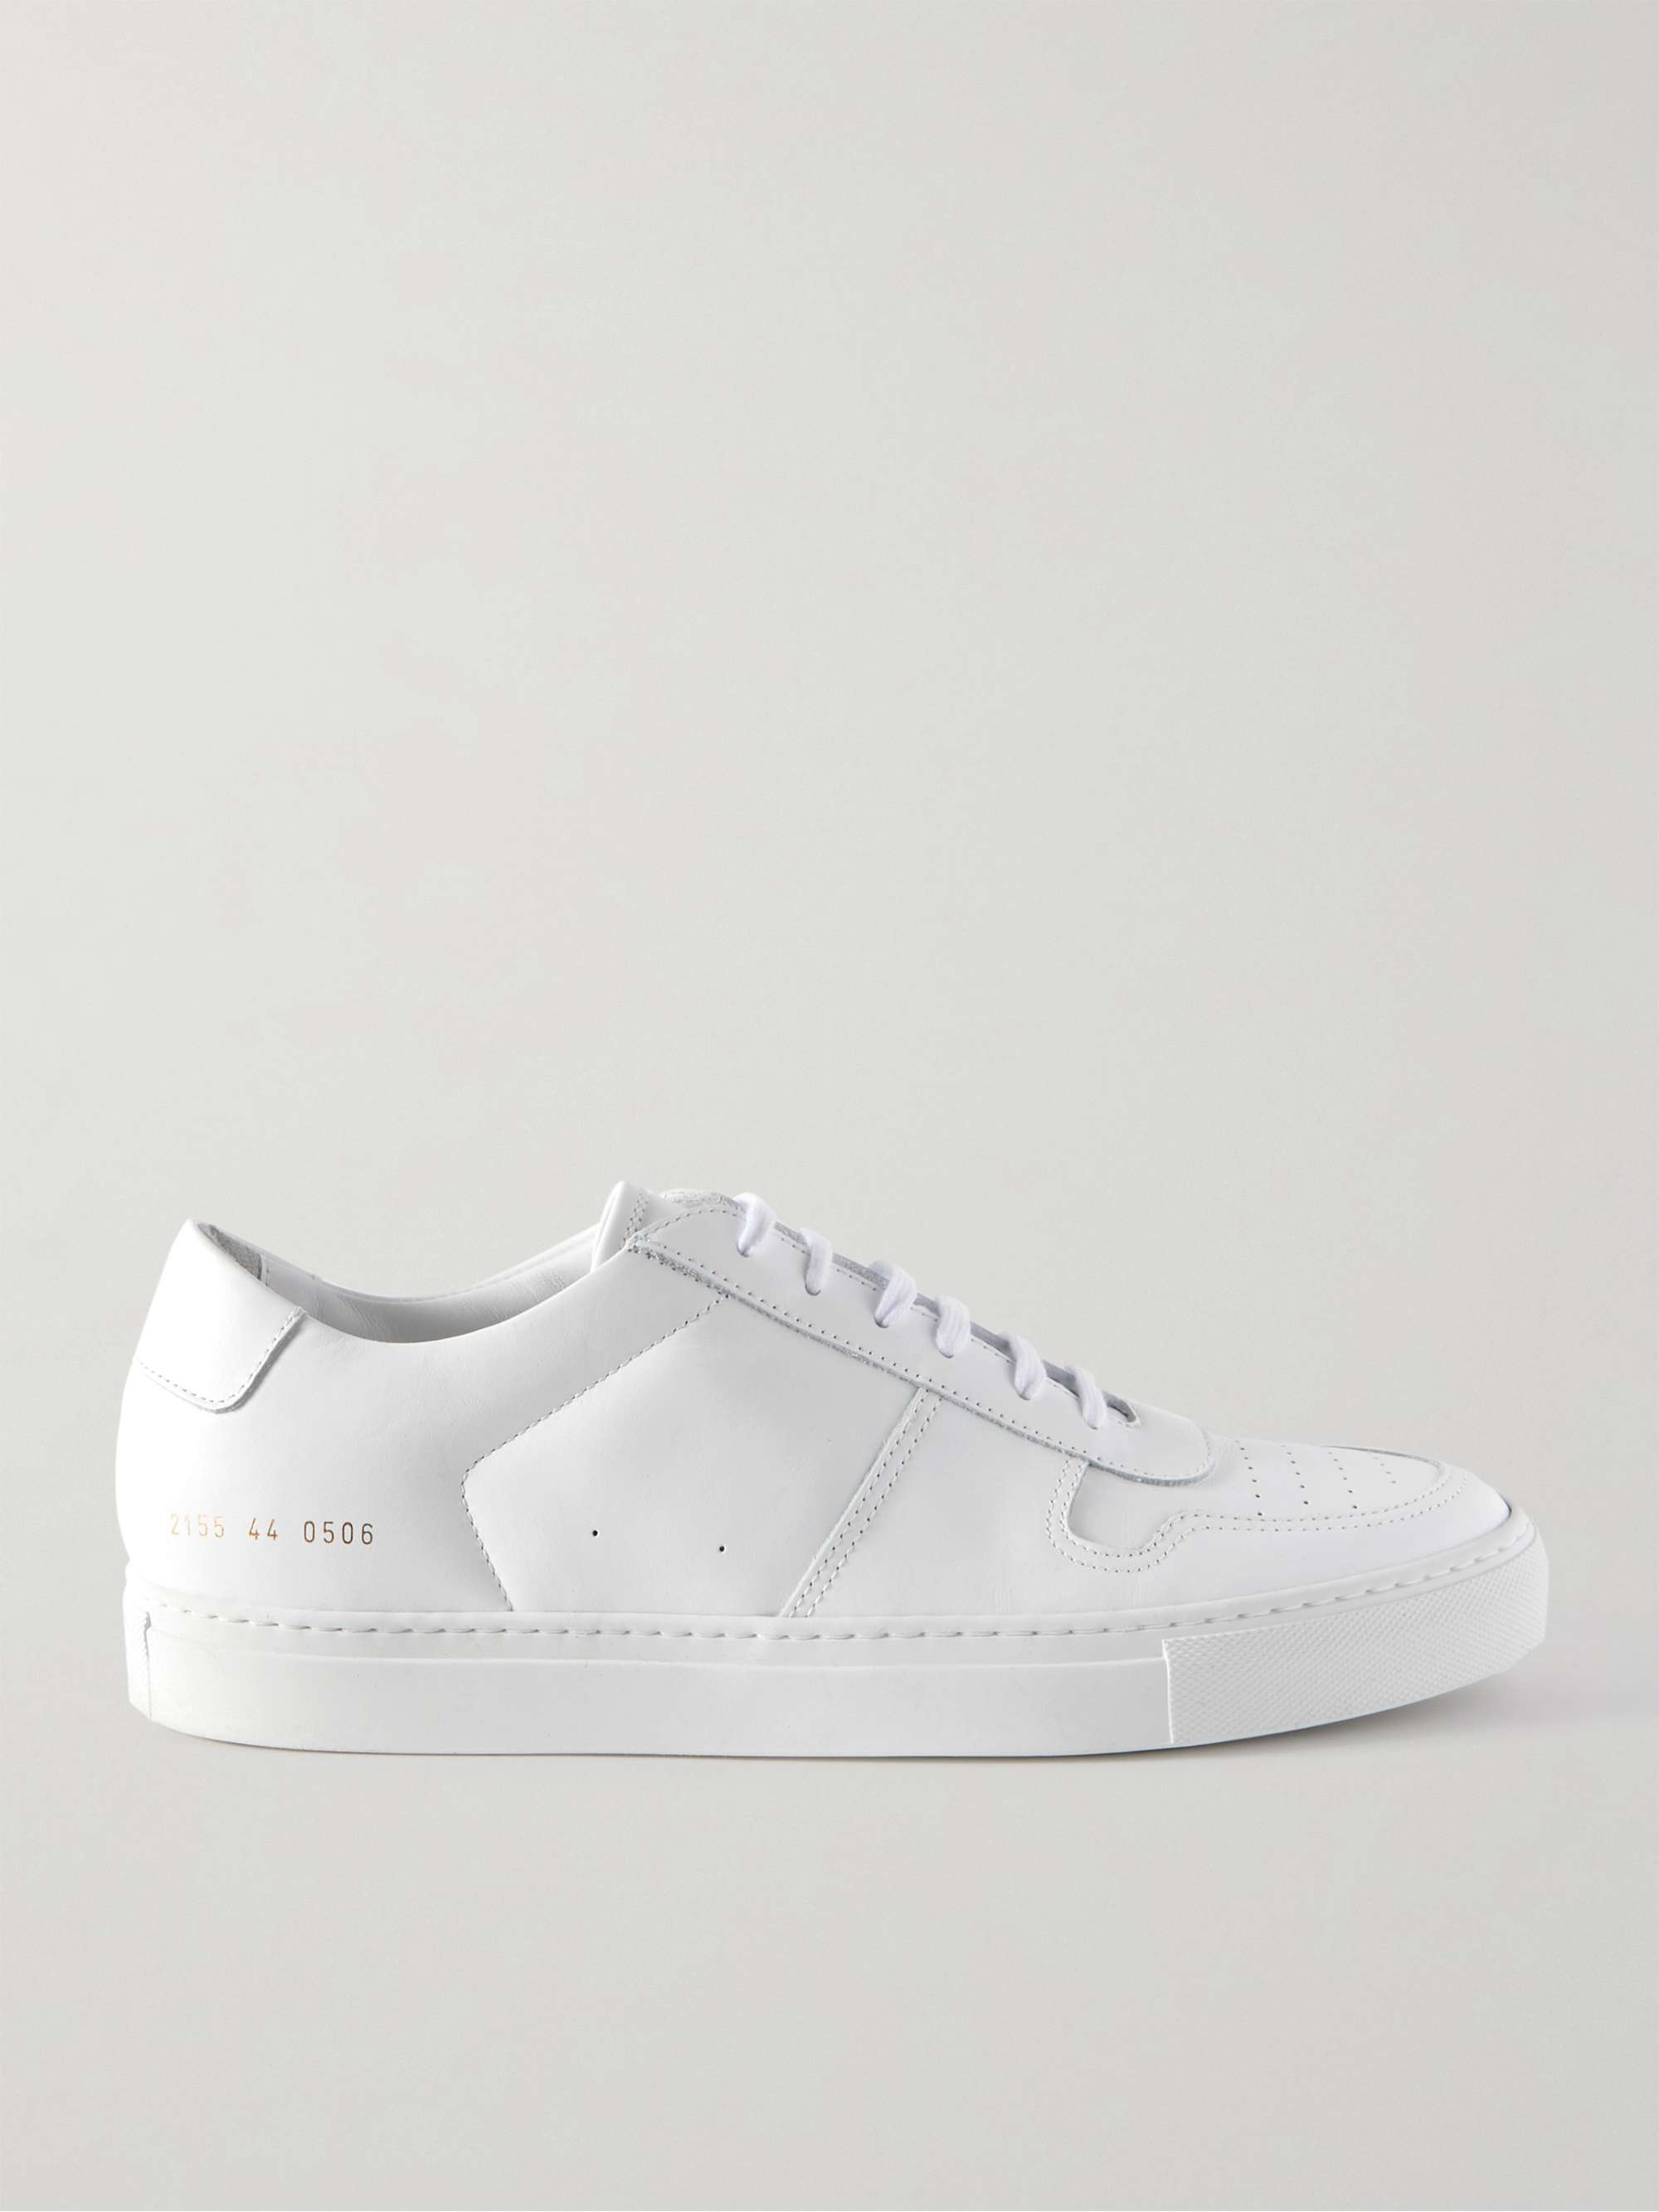 COMMON PROJECTS BBall Leather Sneakers